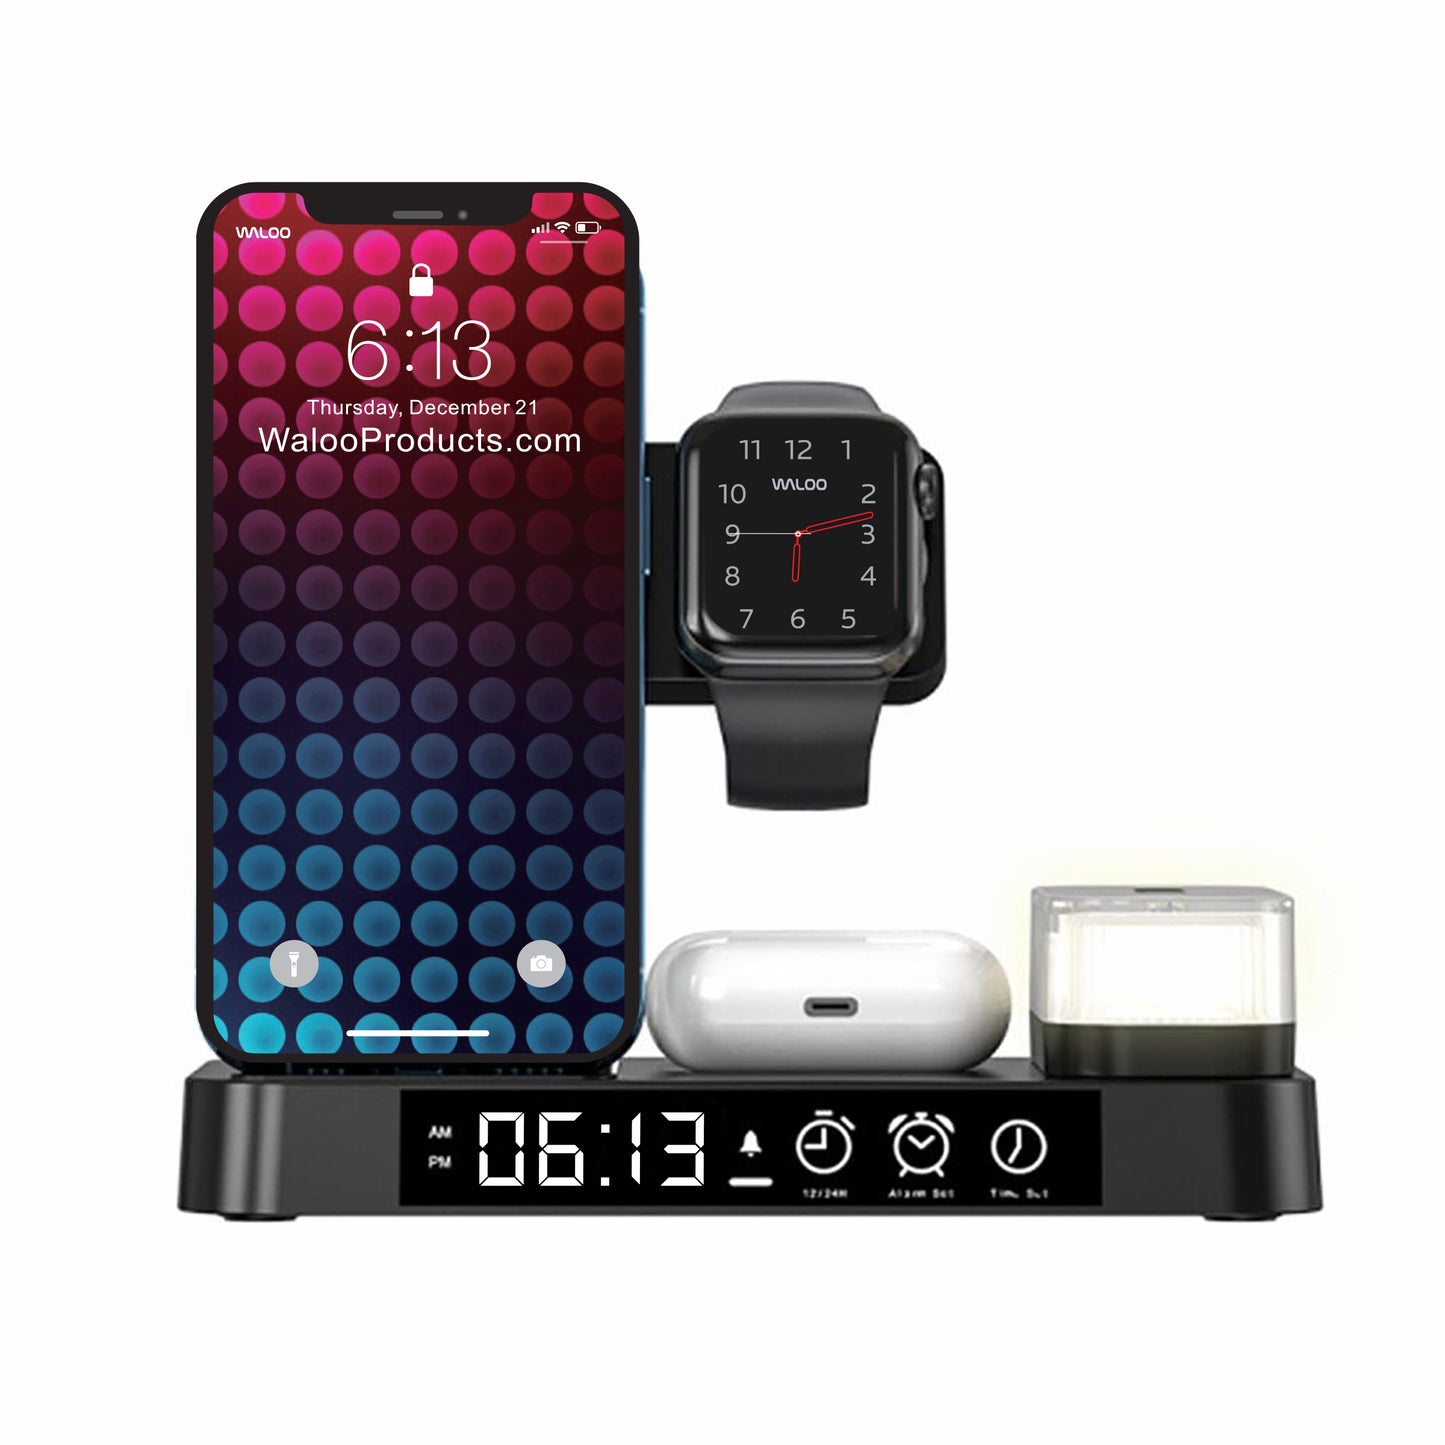 Waloo Wireless Charging Dock With Multi Colored Night Light & Alarm Clock For Apple or Samsung Devices